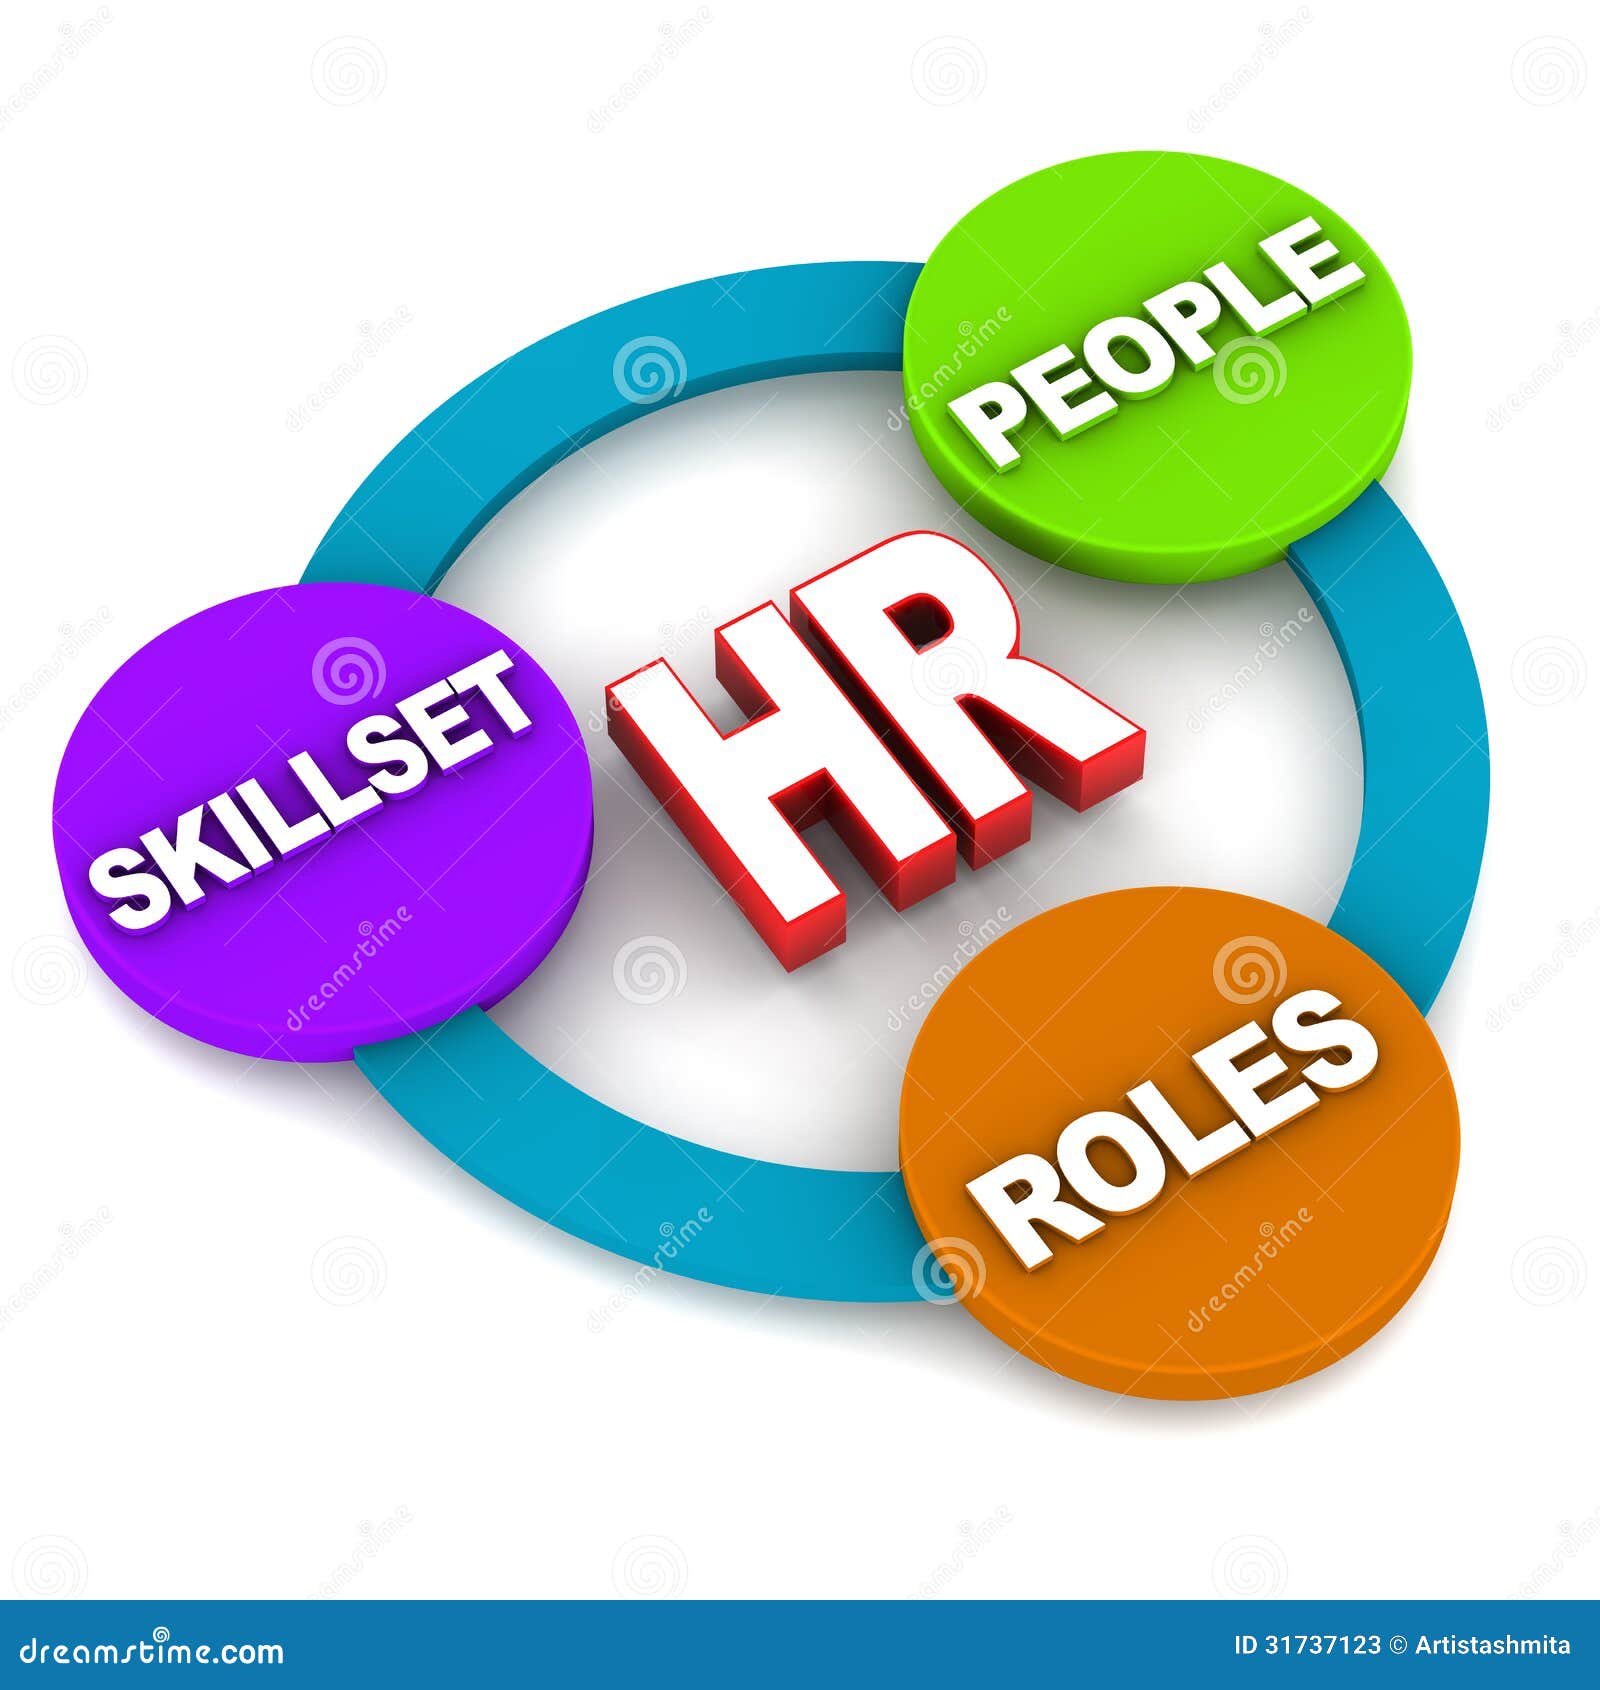 human resources hr concept people skills roles white background 31737123